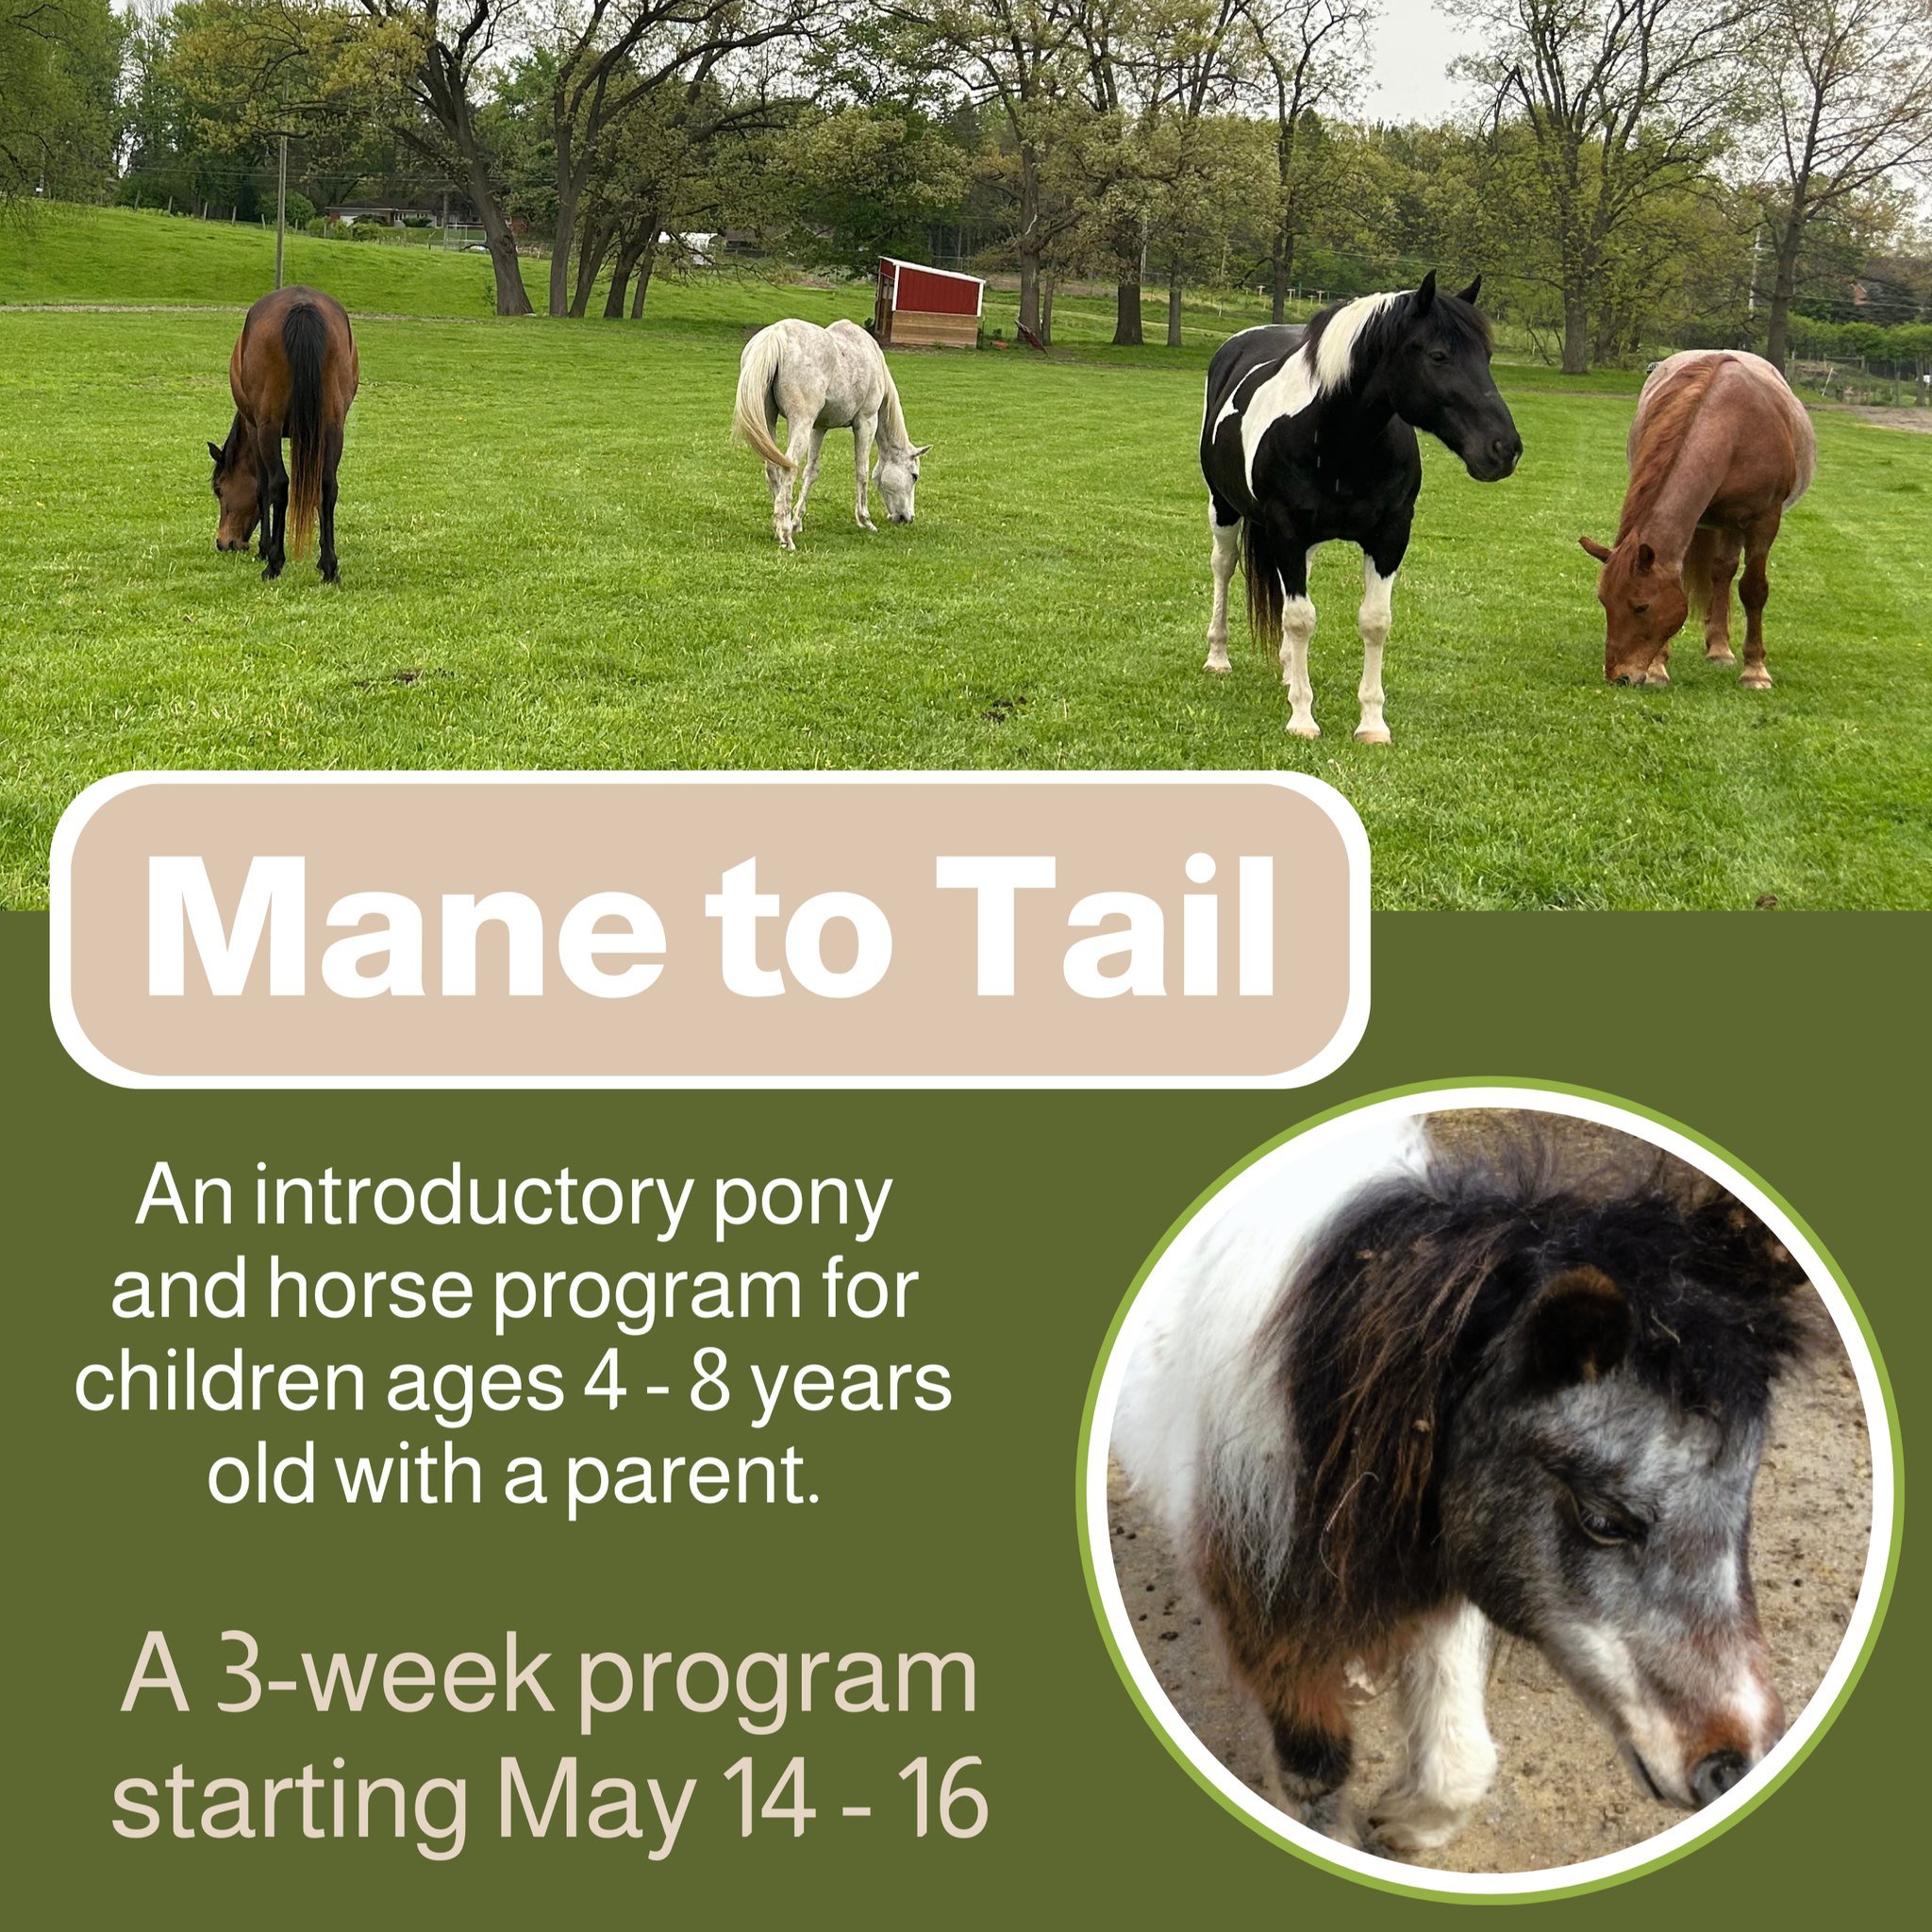 Join us for our Mane to Tail program for kids with a parent starting next week.  This program runs for three weeks with a 1 hour class per week to learn the basics for horses and ponies from handling and grooming, to tacking and riding.  The horses a